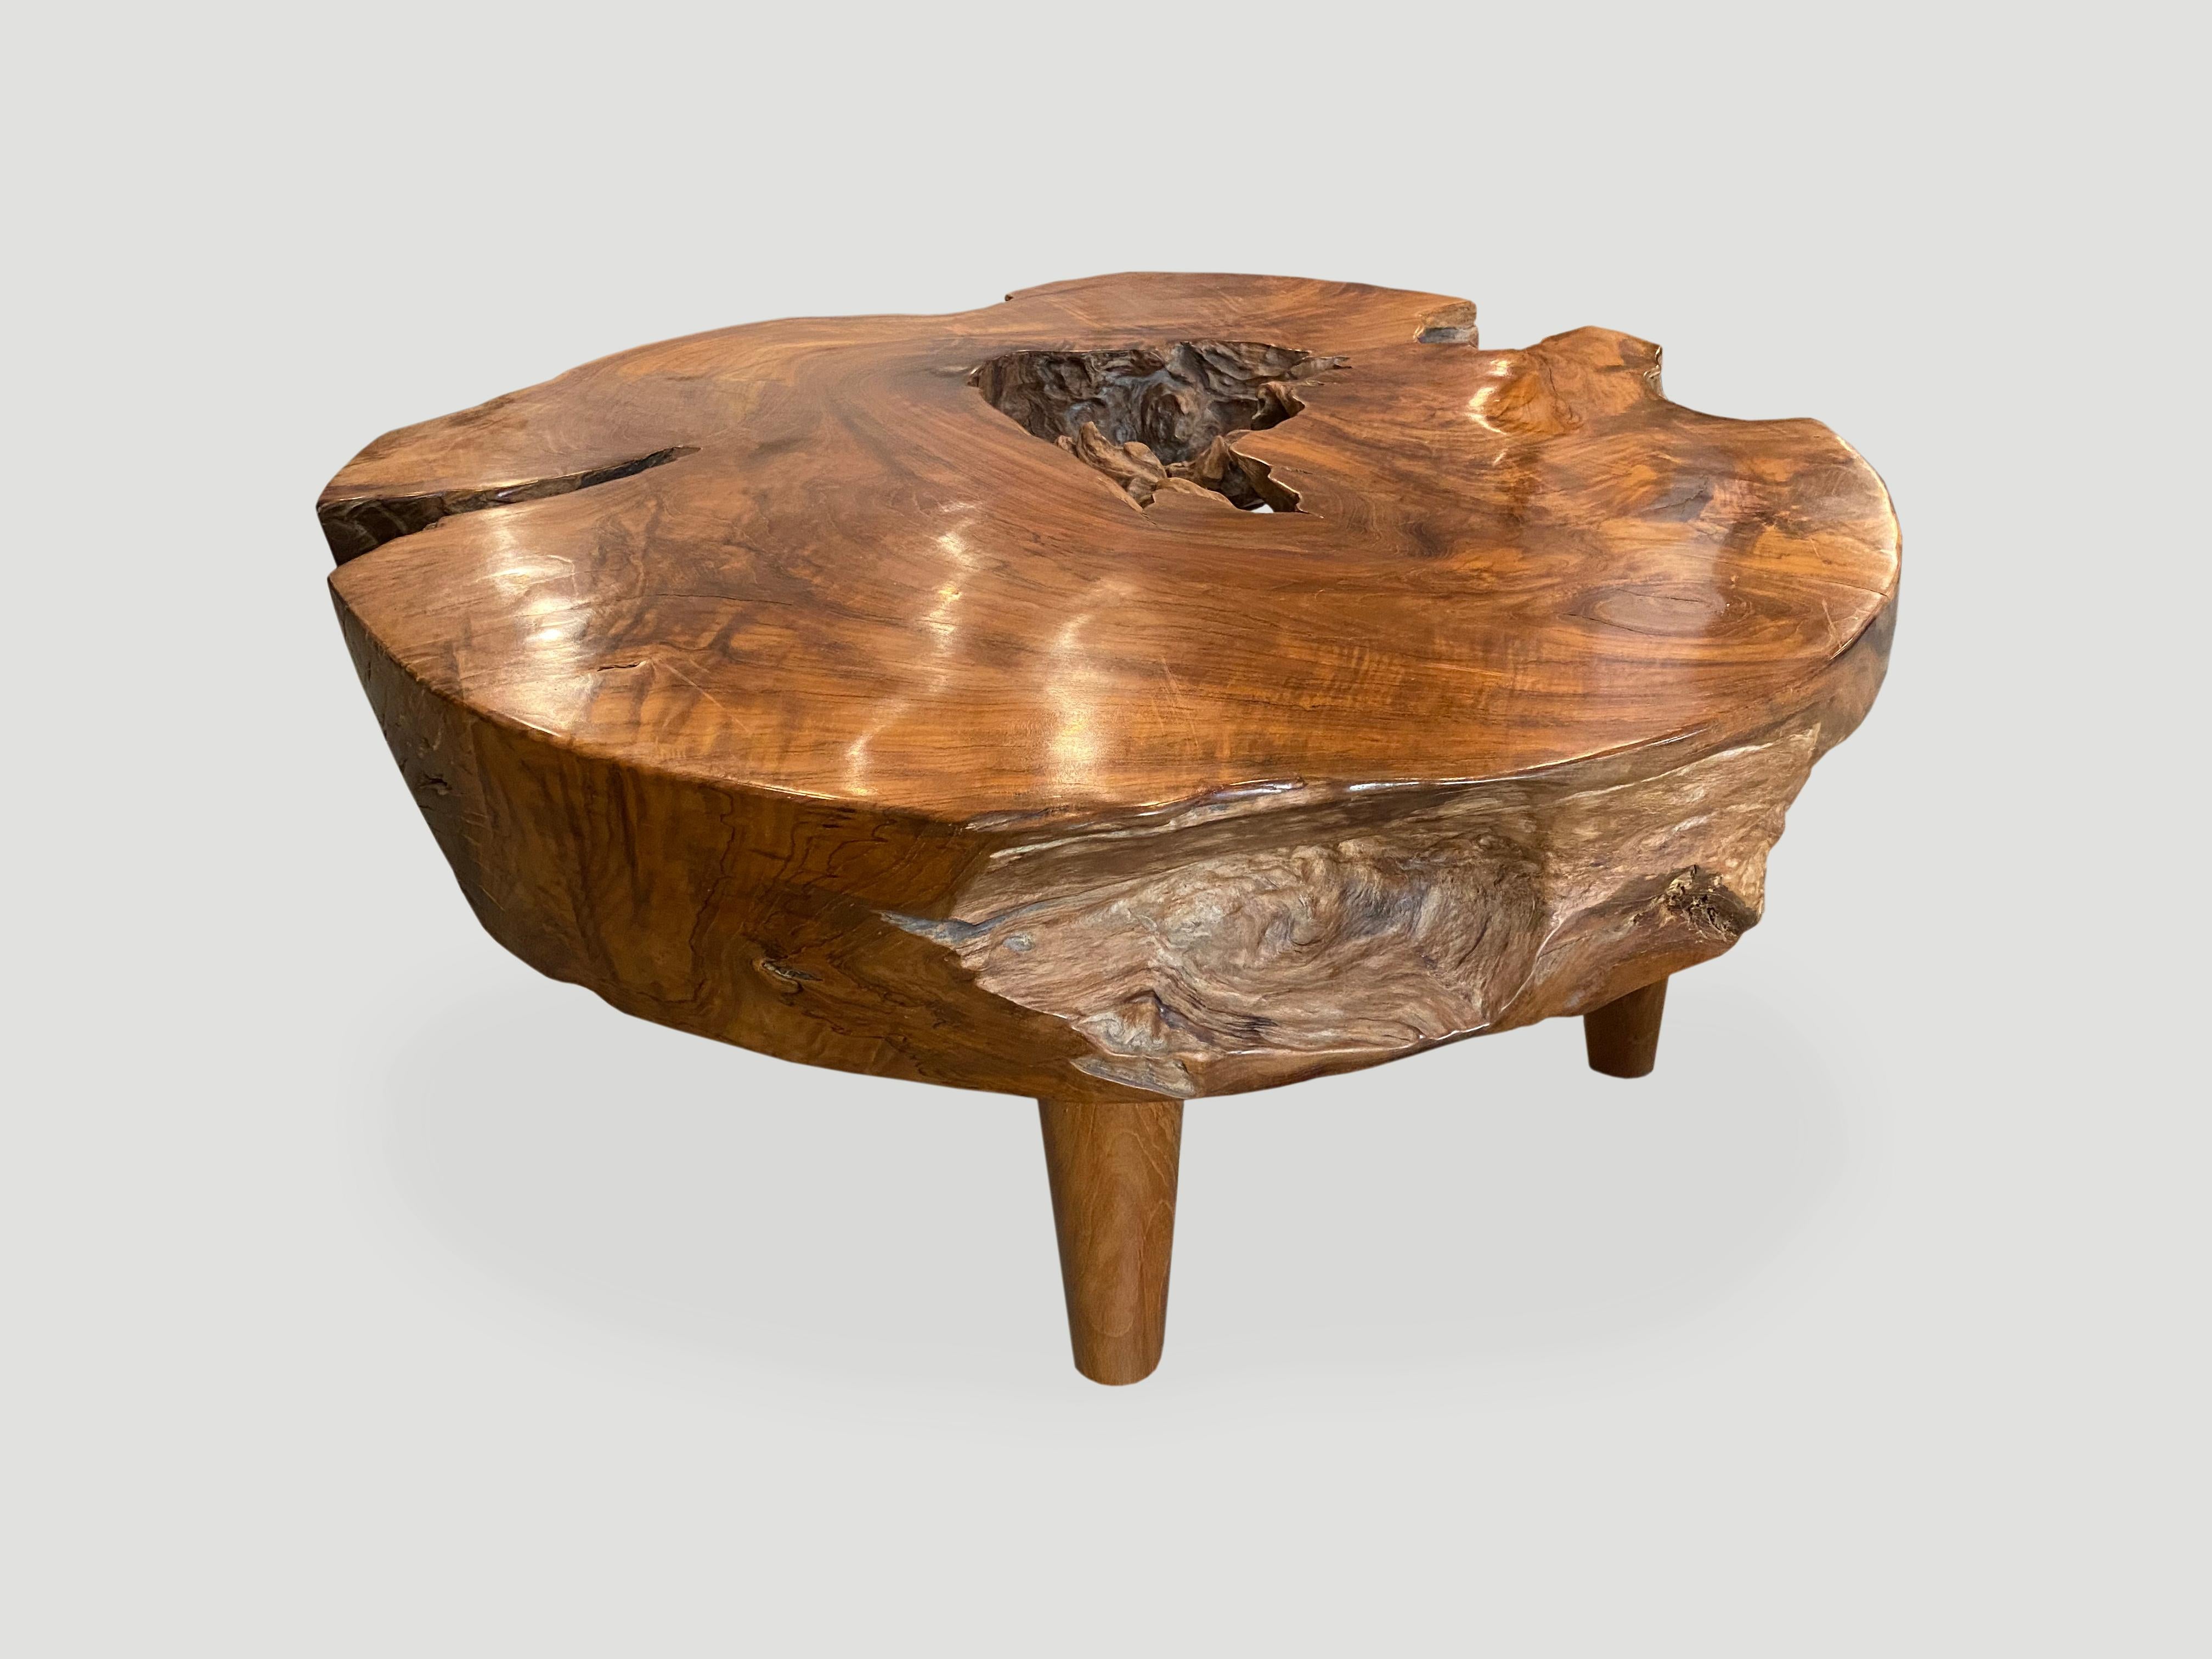 Impressive six inch thick natural teak wood coffee table carved from a single log. Floating on midcentury style cone shaped legs. Organic with a twist. We have a collection. The size and price reflect the one shown.

Own an Andrianna Shamaris